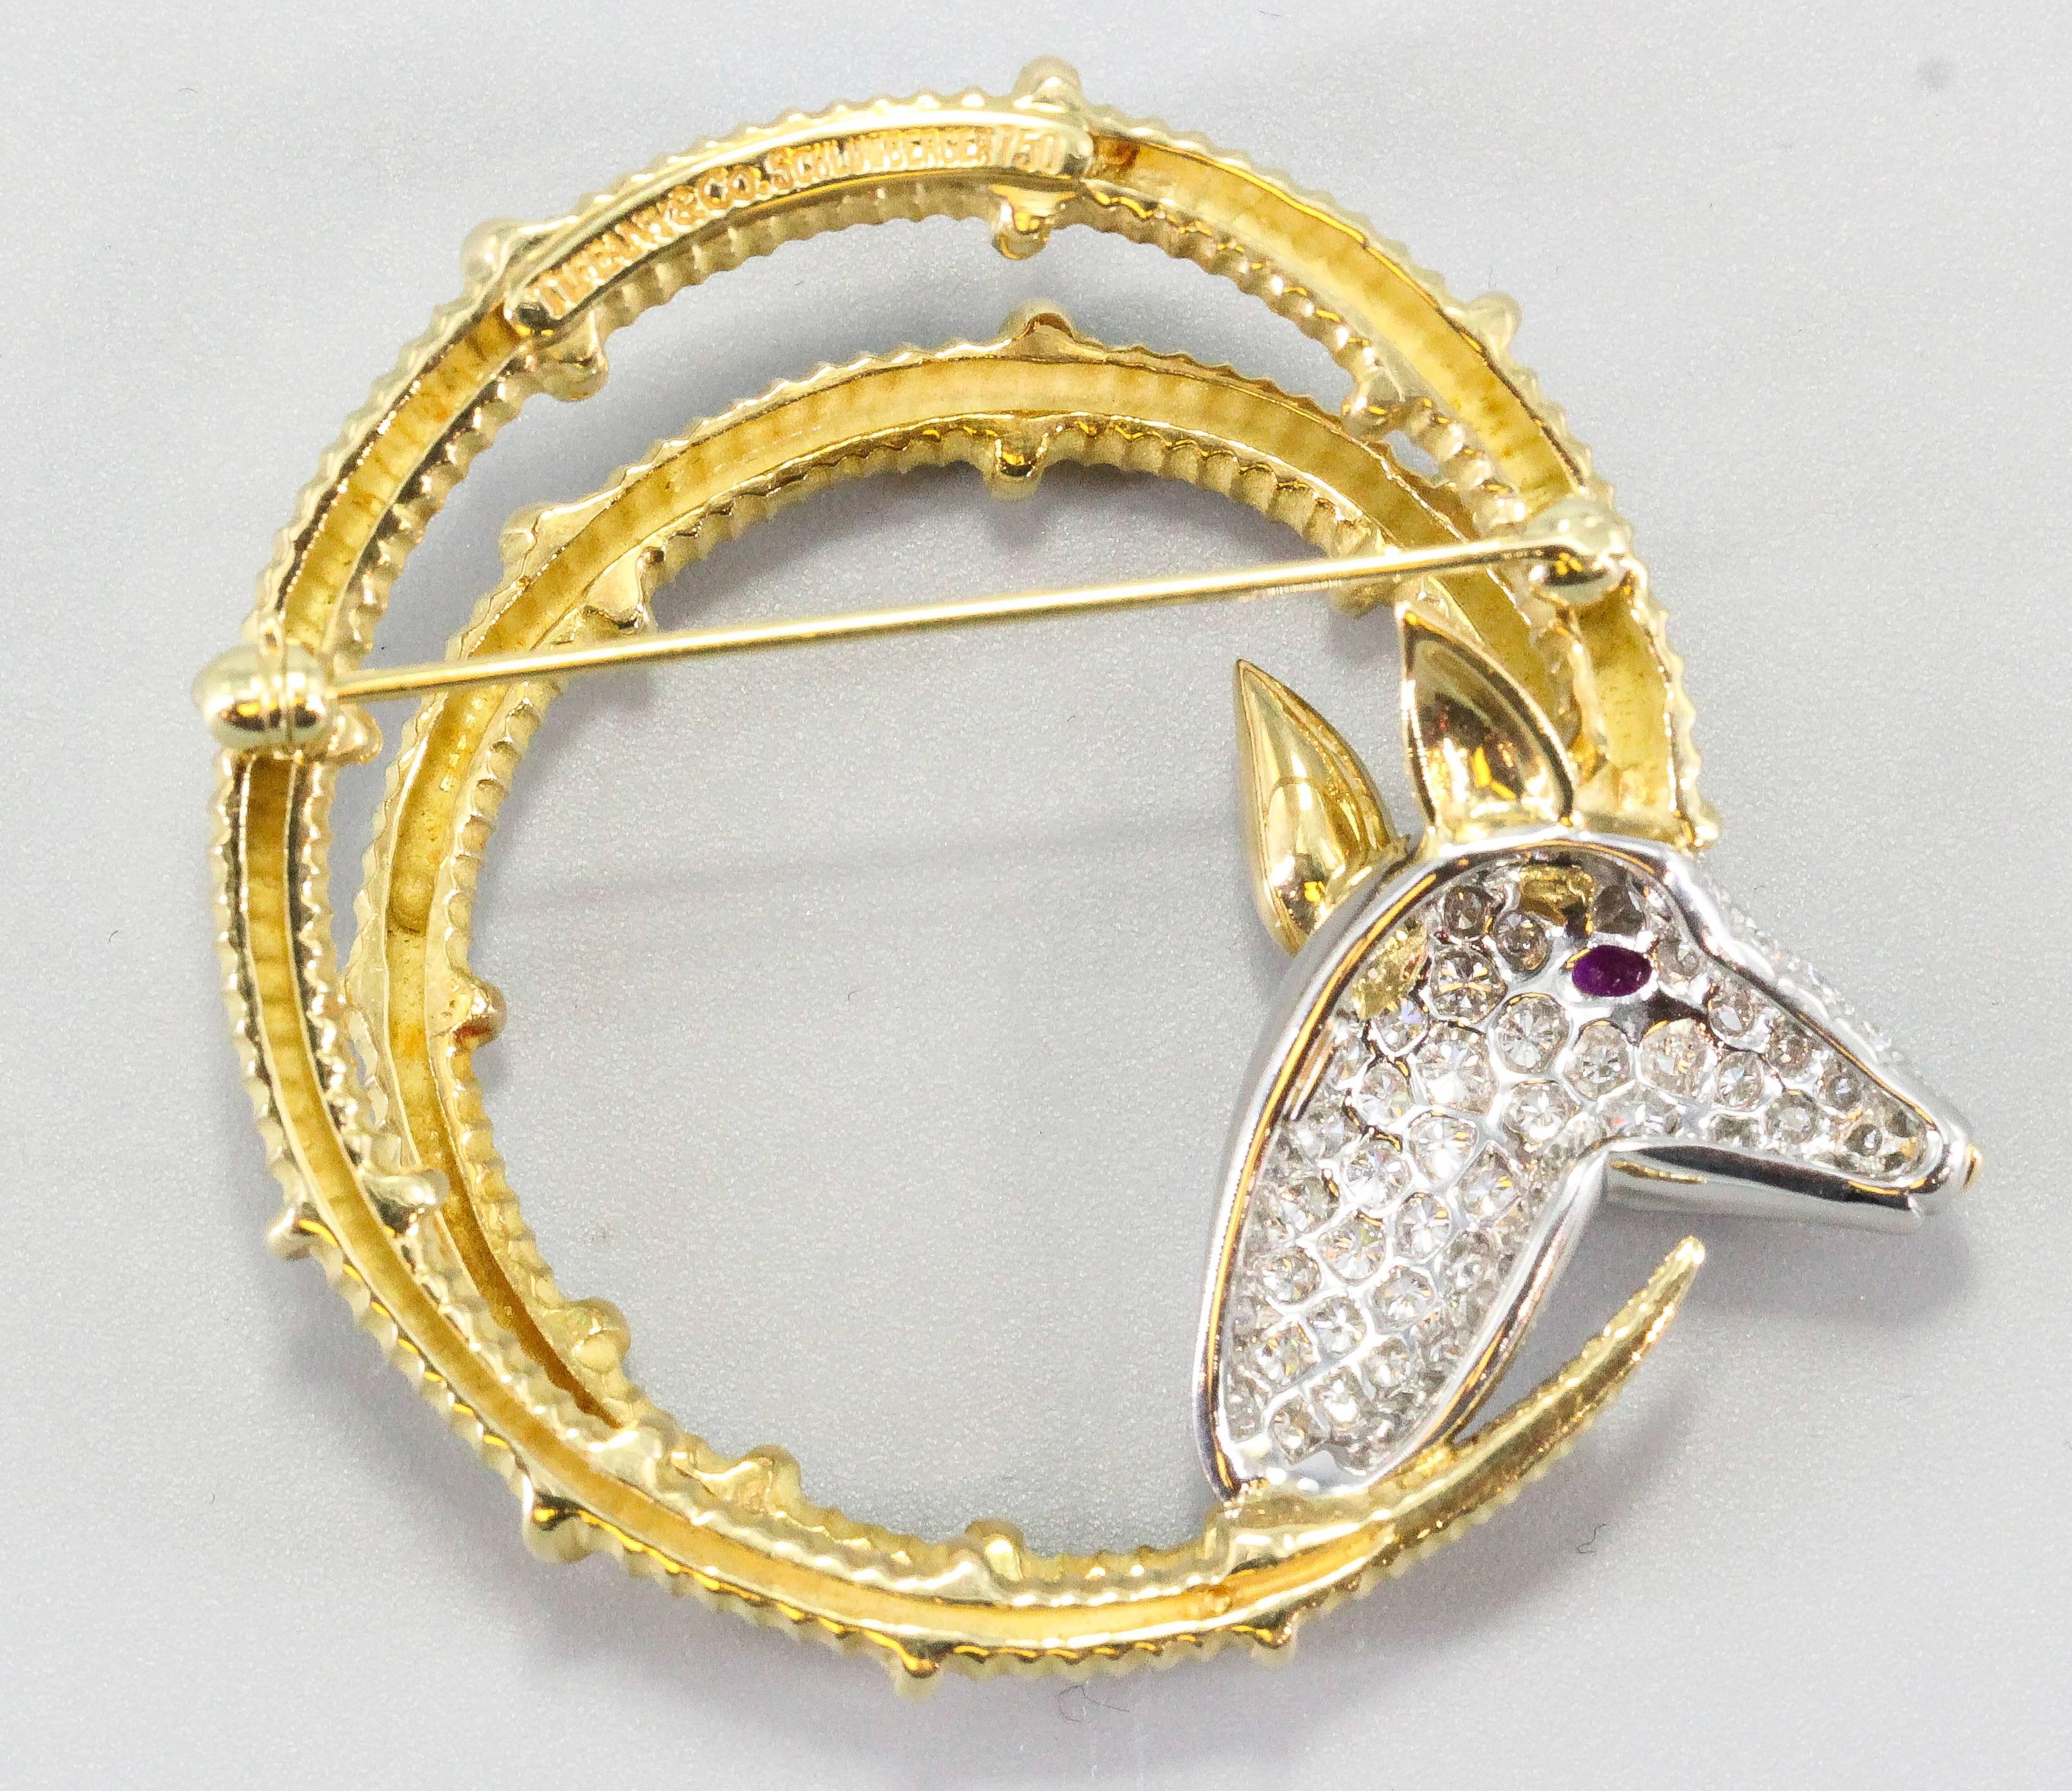 Very fine Ibex brooch by Tiffany & Co. Schlumberger.  Made in 18k yellow gold and platinum, with a ruby eye and high grade white diamond pave. 

Hallmarks: Tiffany & Co., Schumberger, 750, PT950.